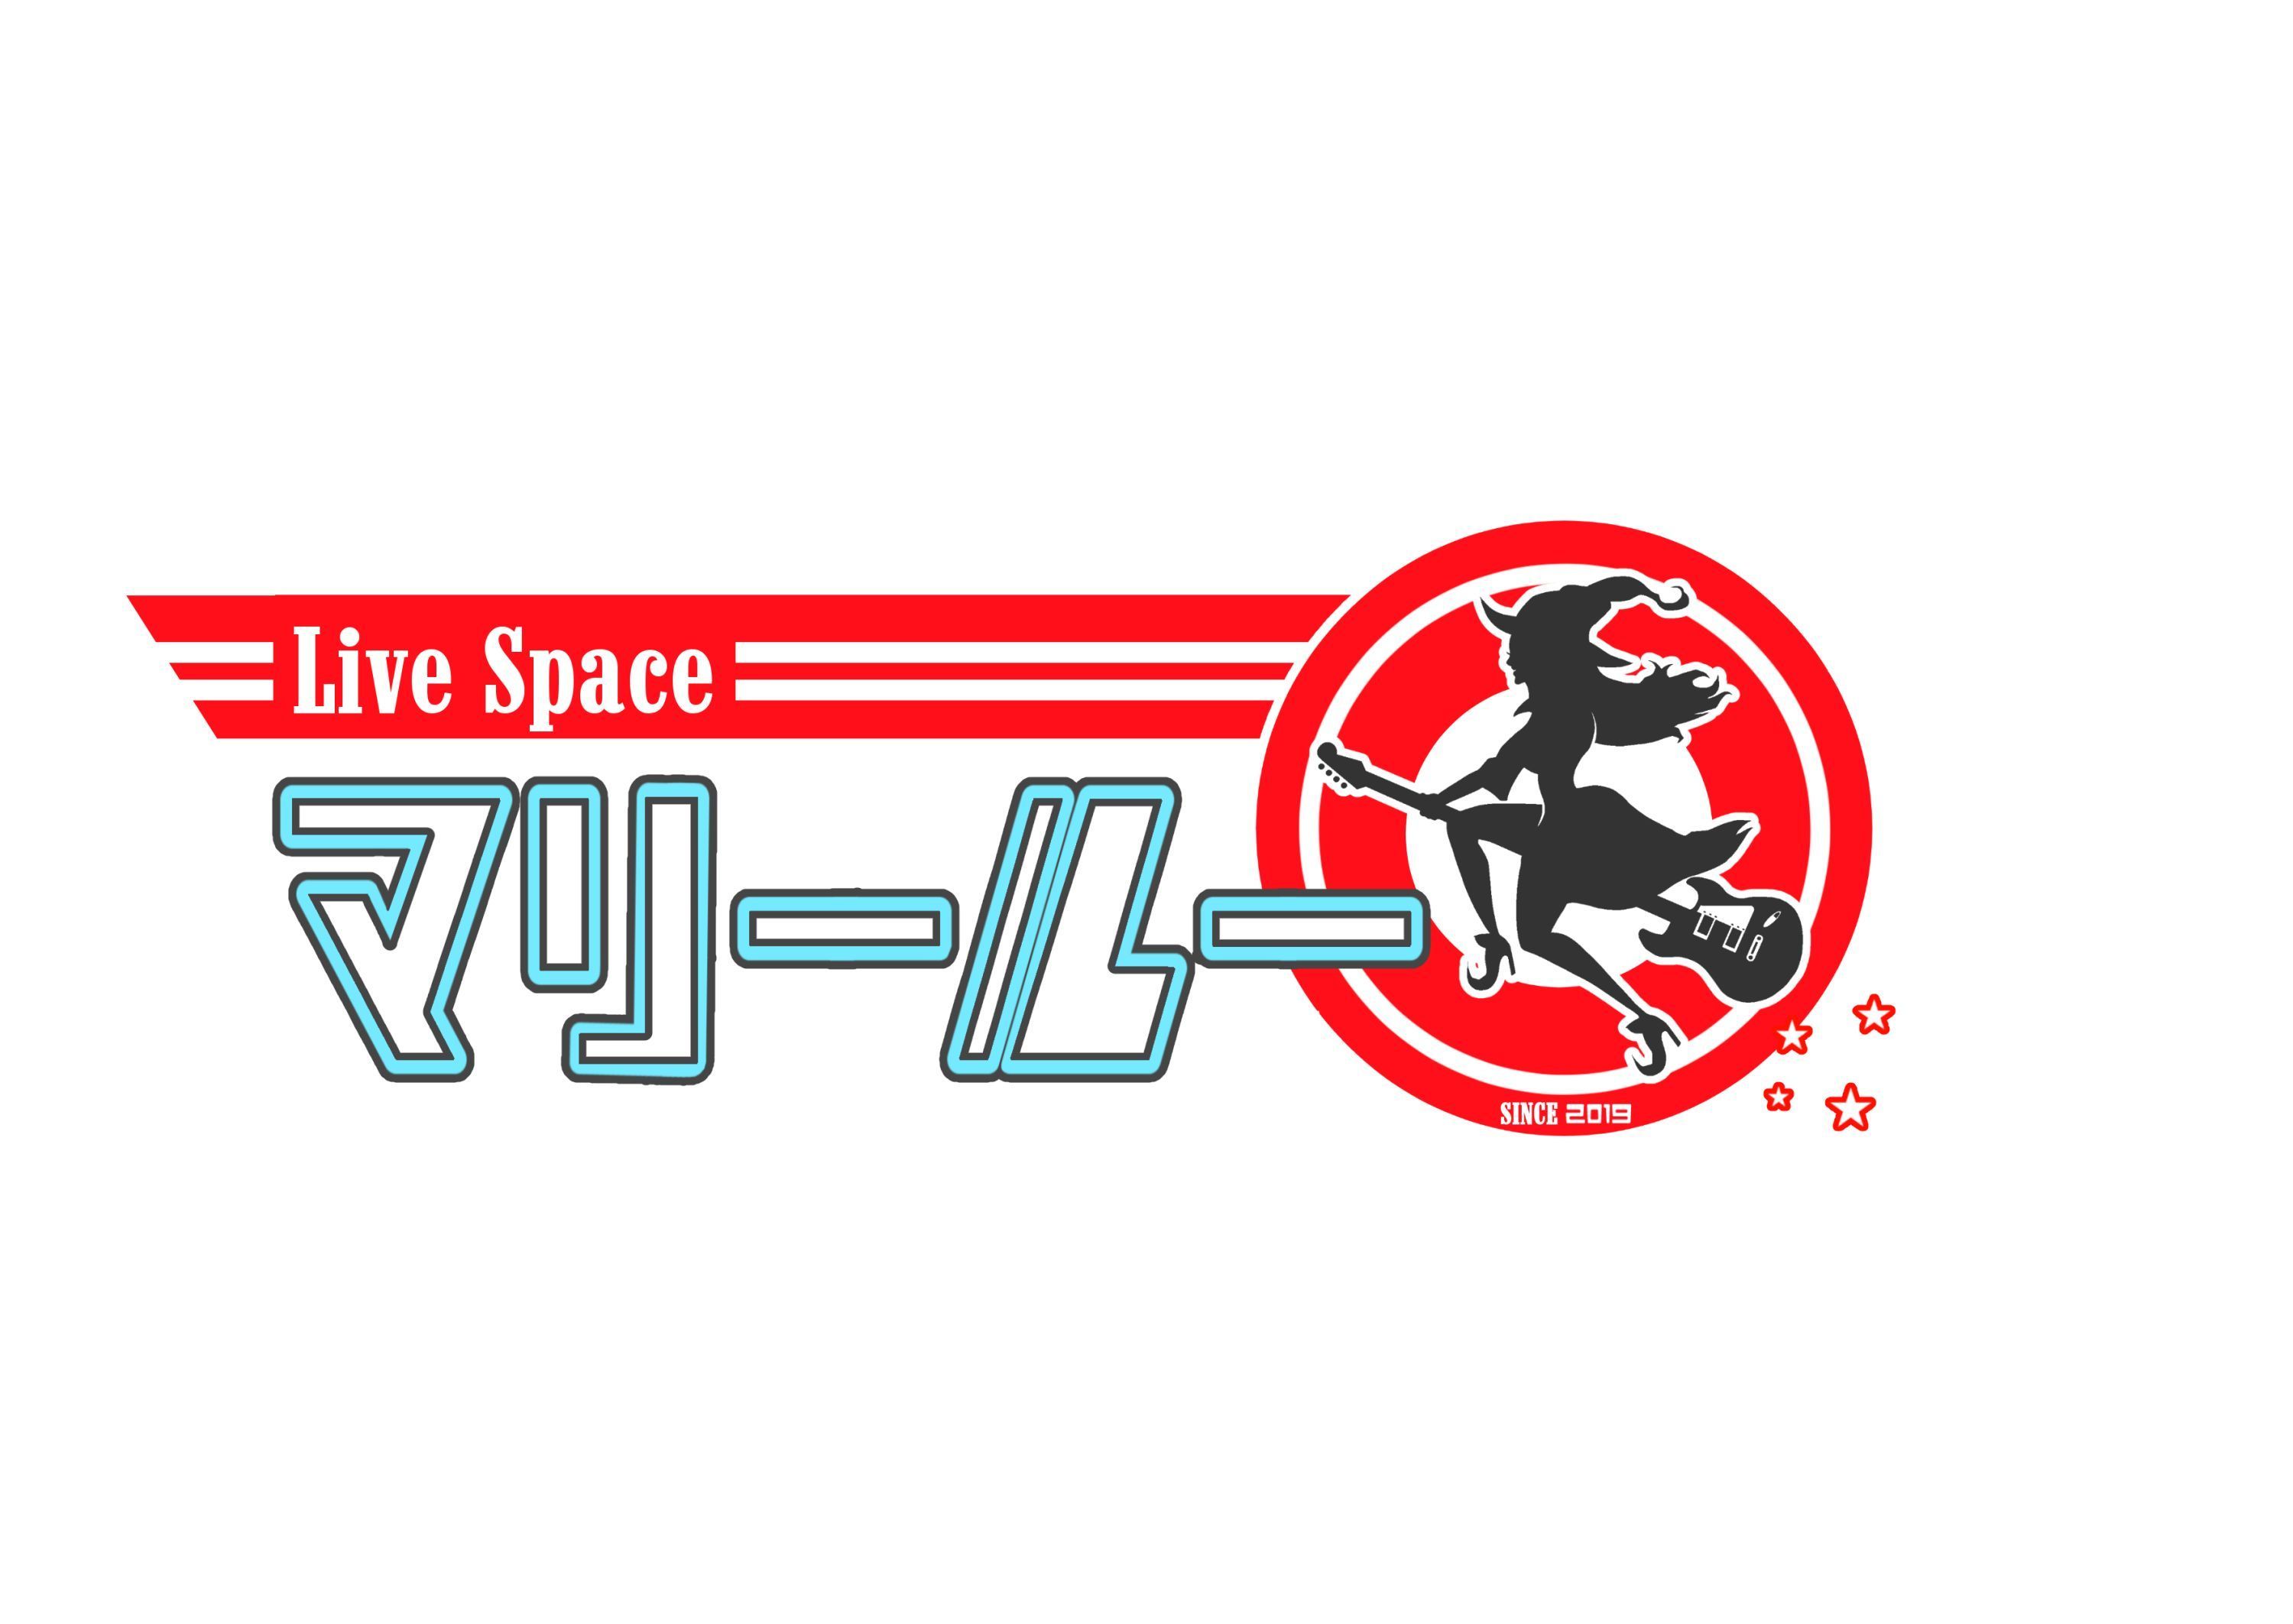 Live Space マリールー